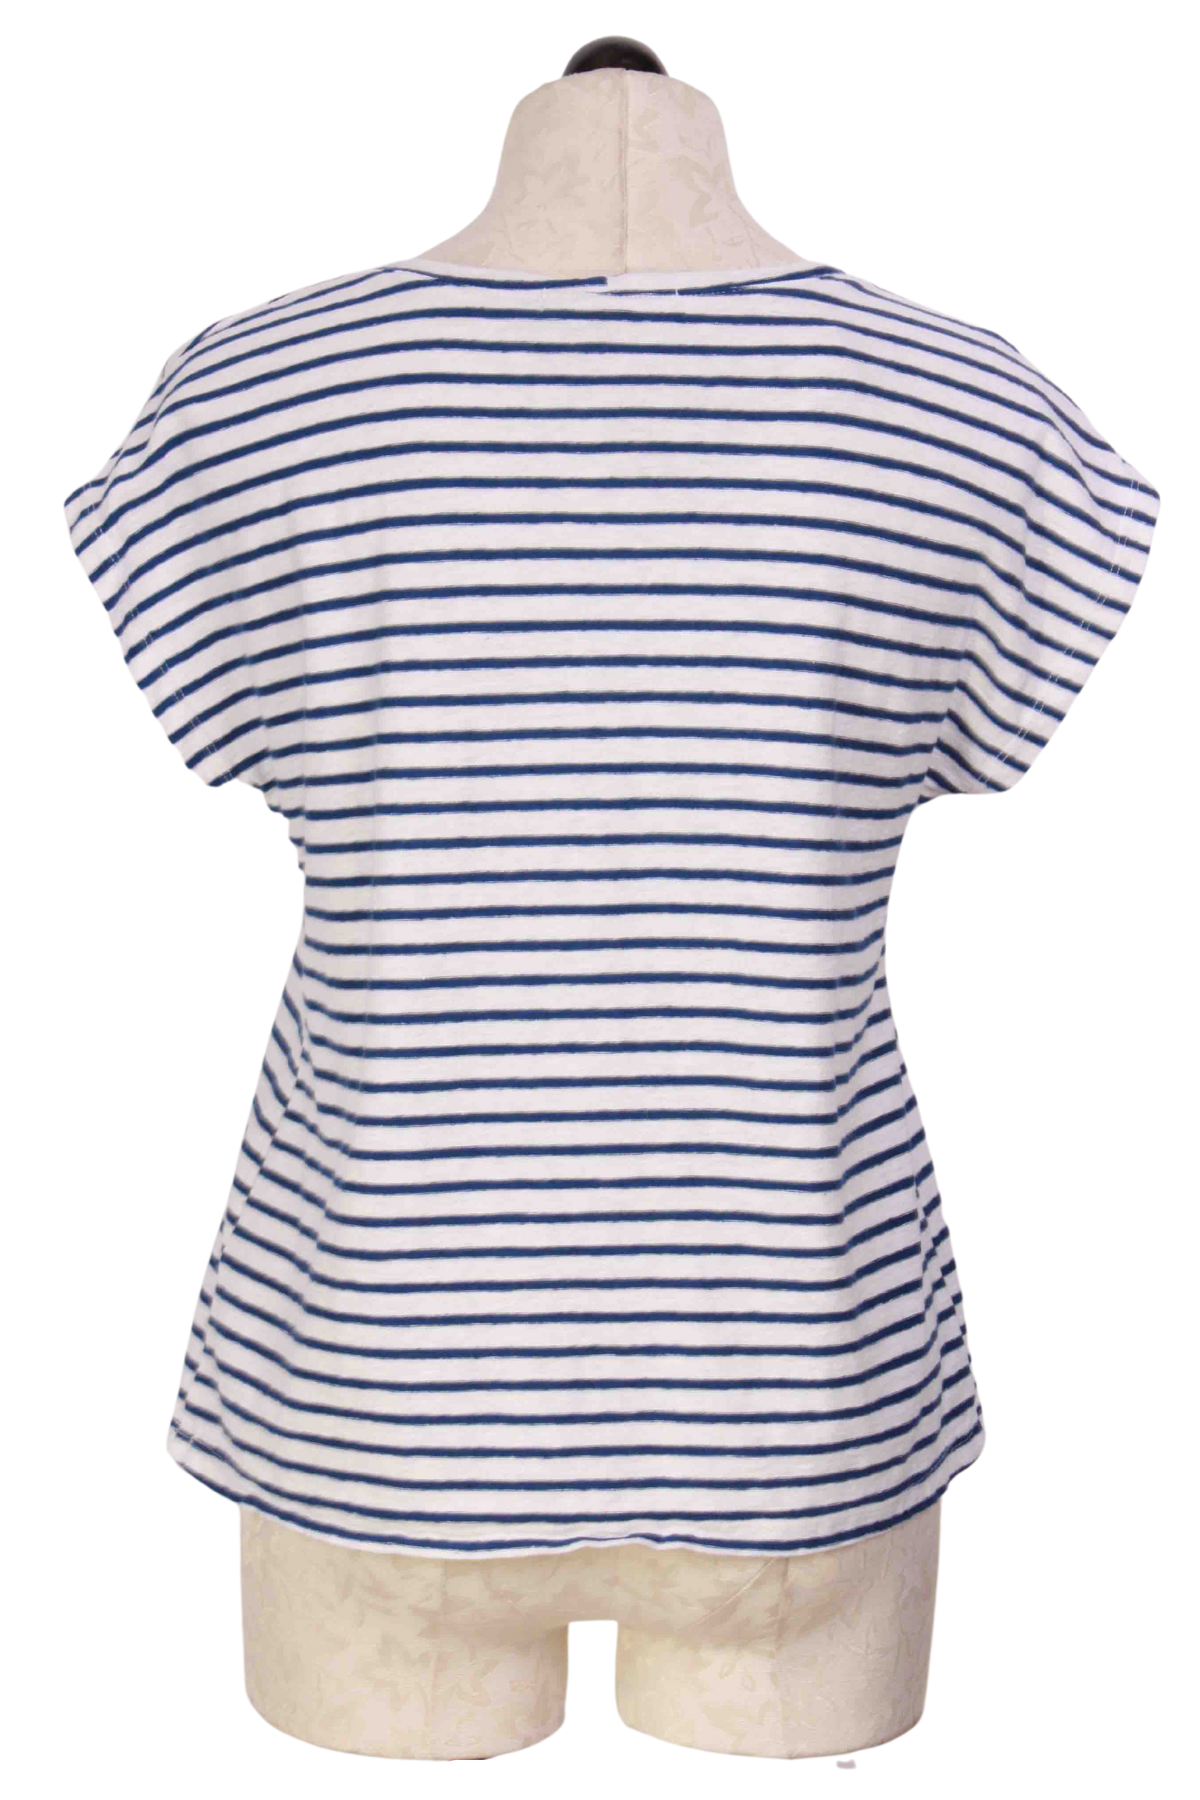 back view of Short Sleeve Navy Striped Boatneck Boxy Top by Cut Loose